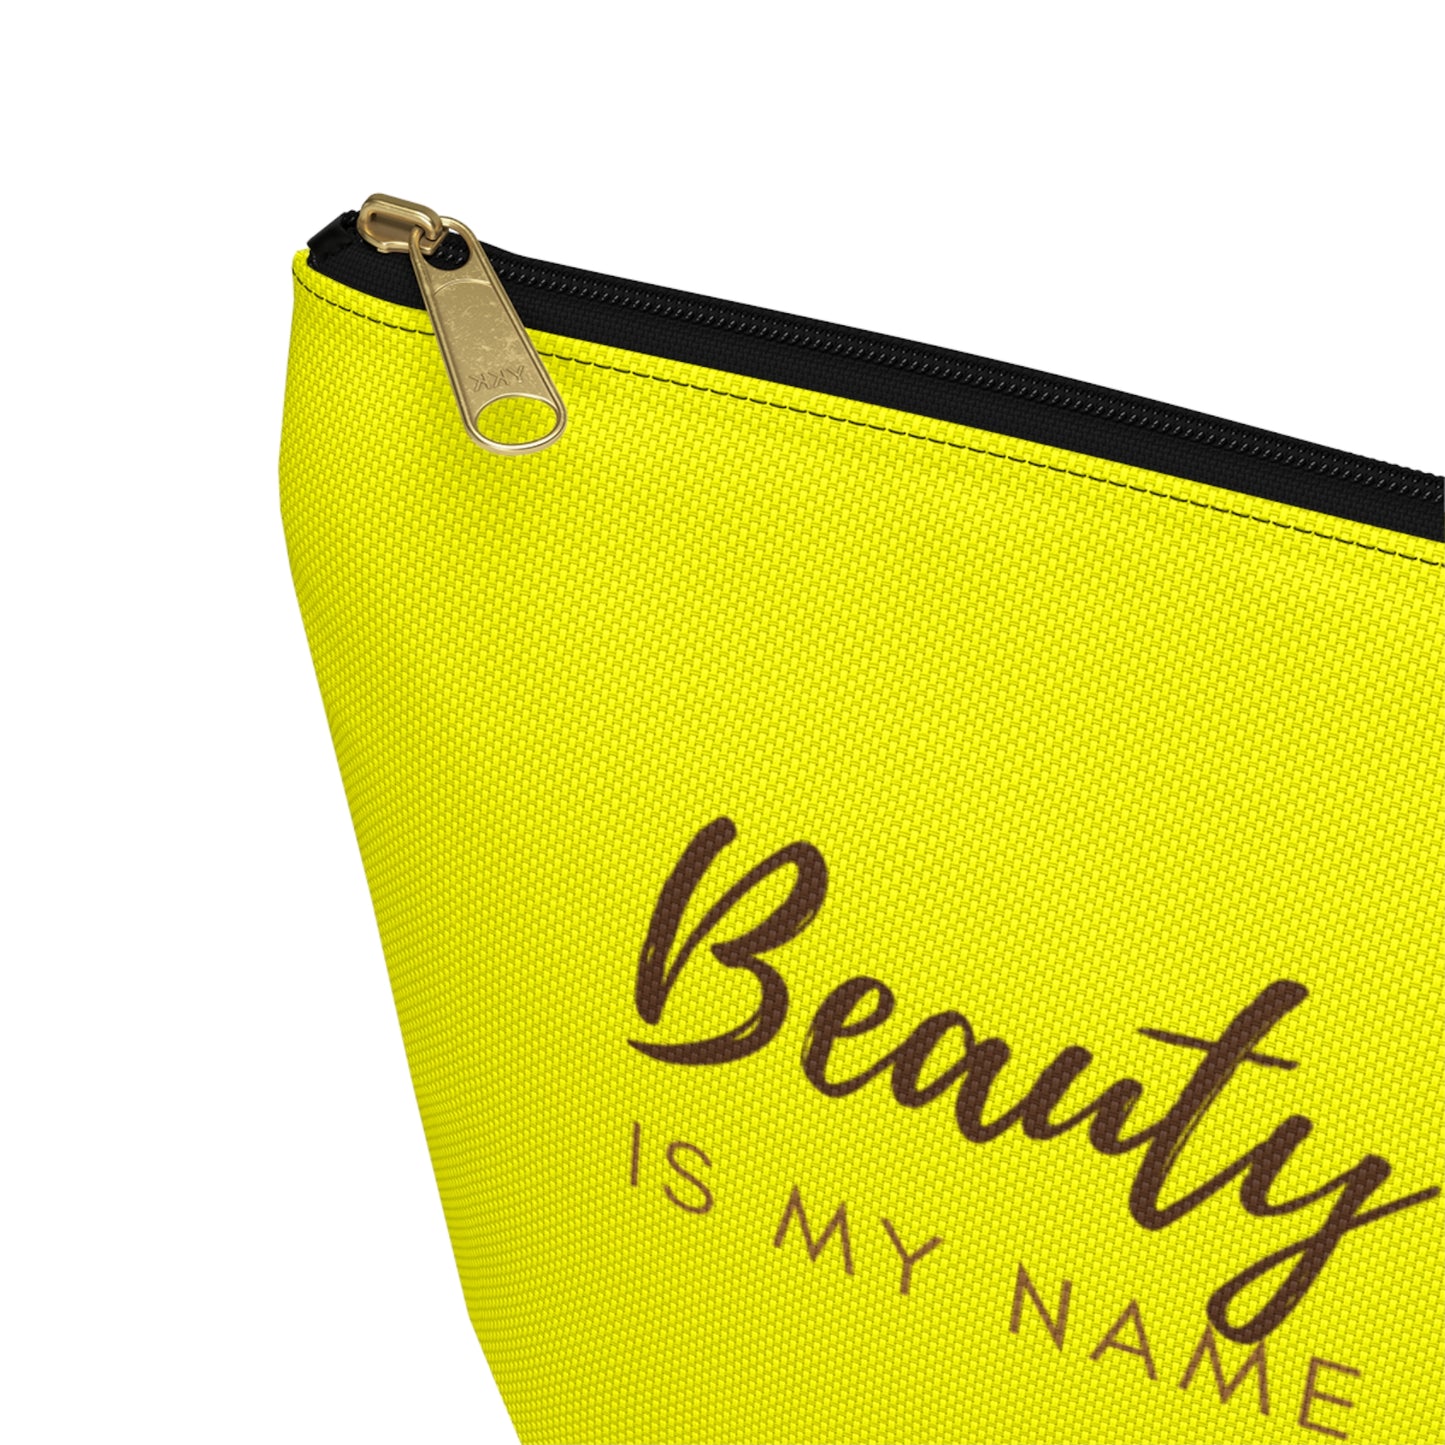 Beauty Is My Name Pouch